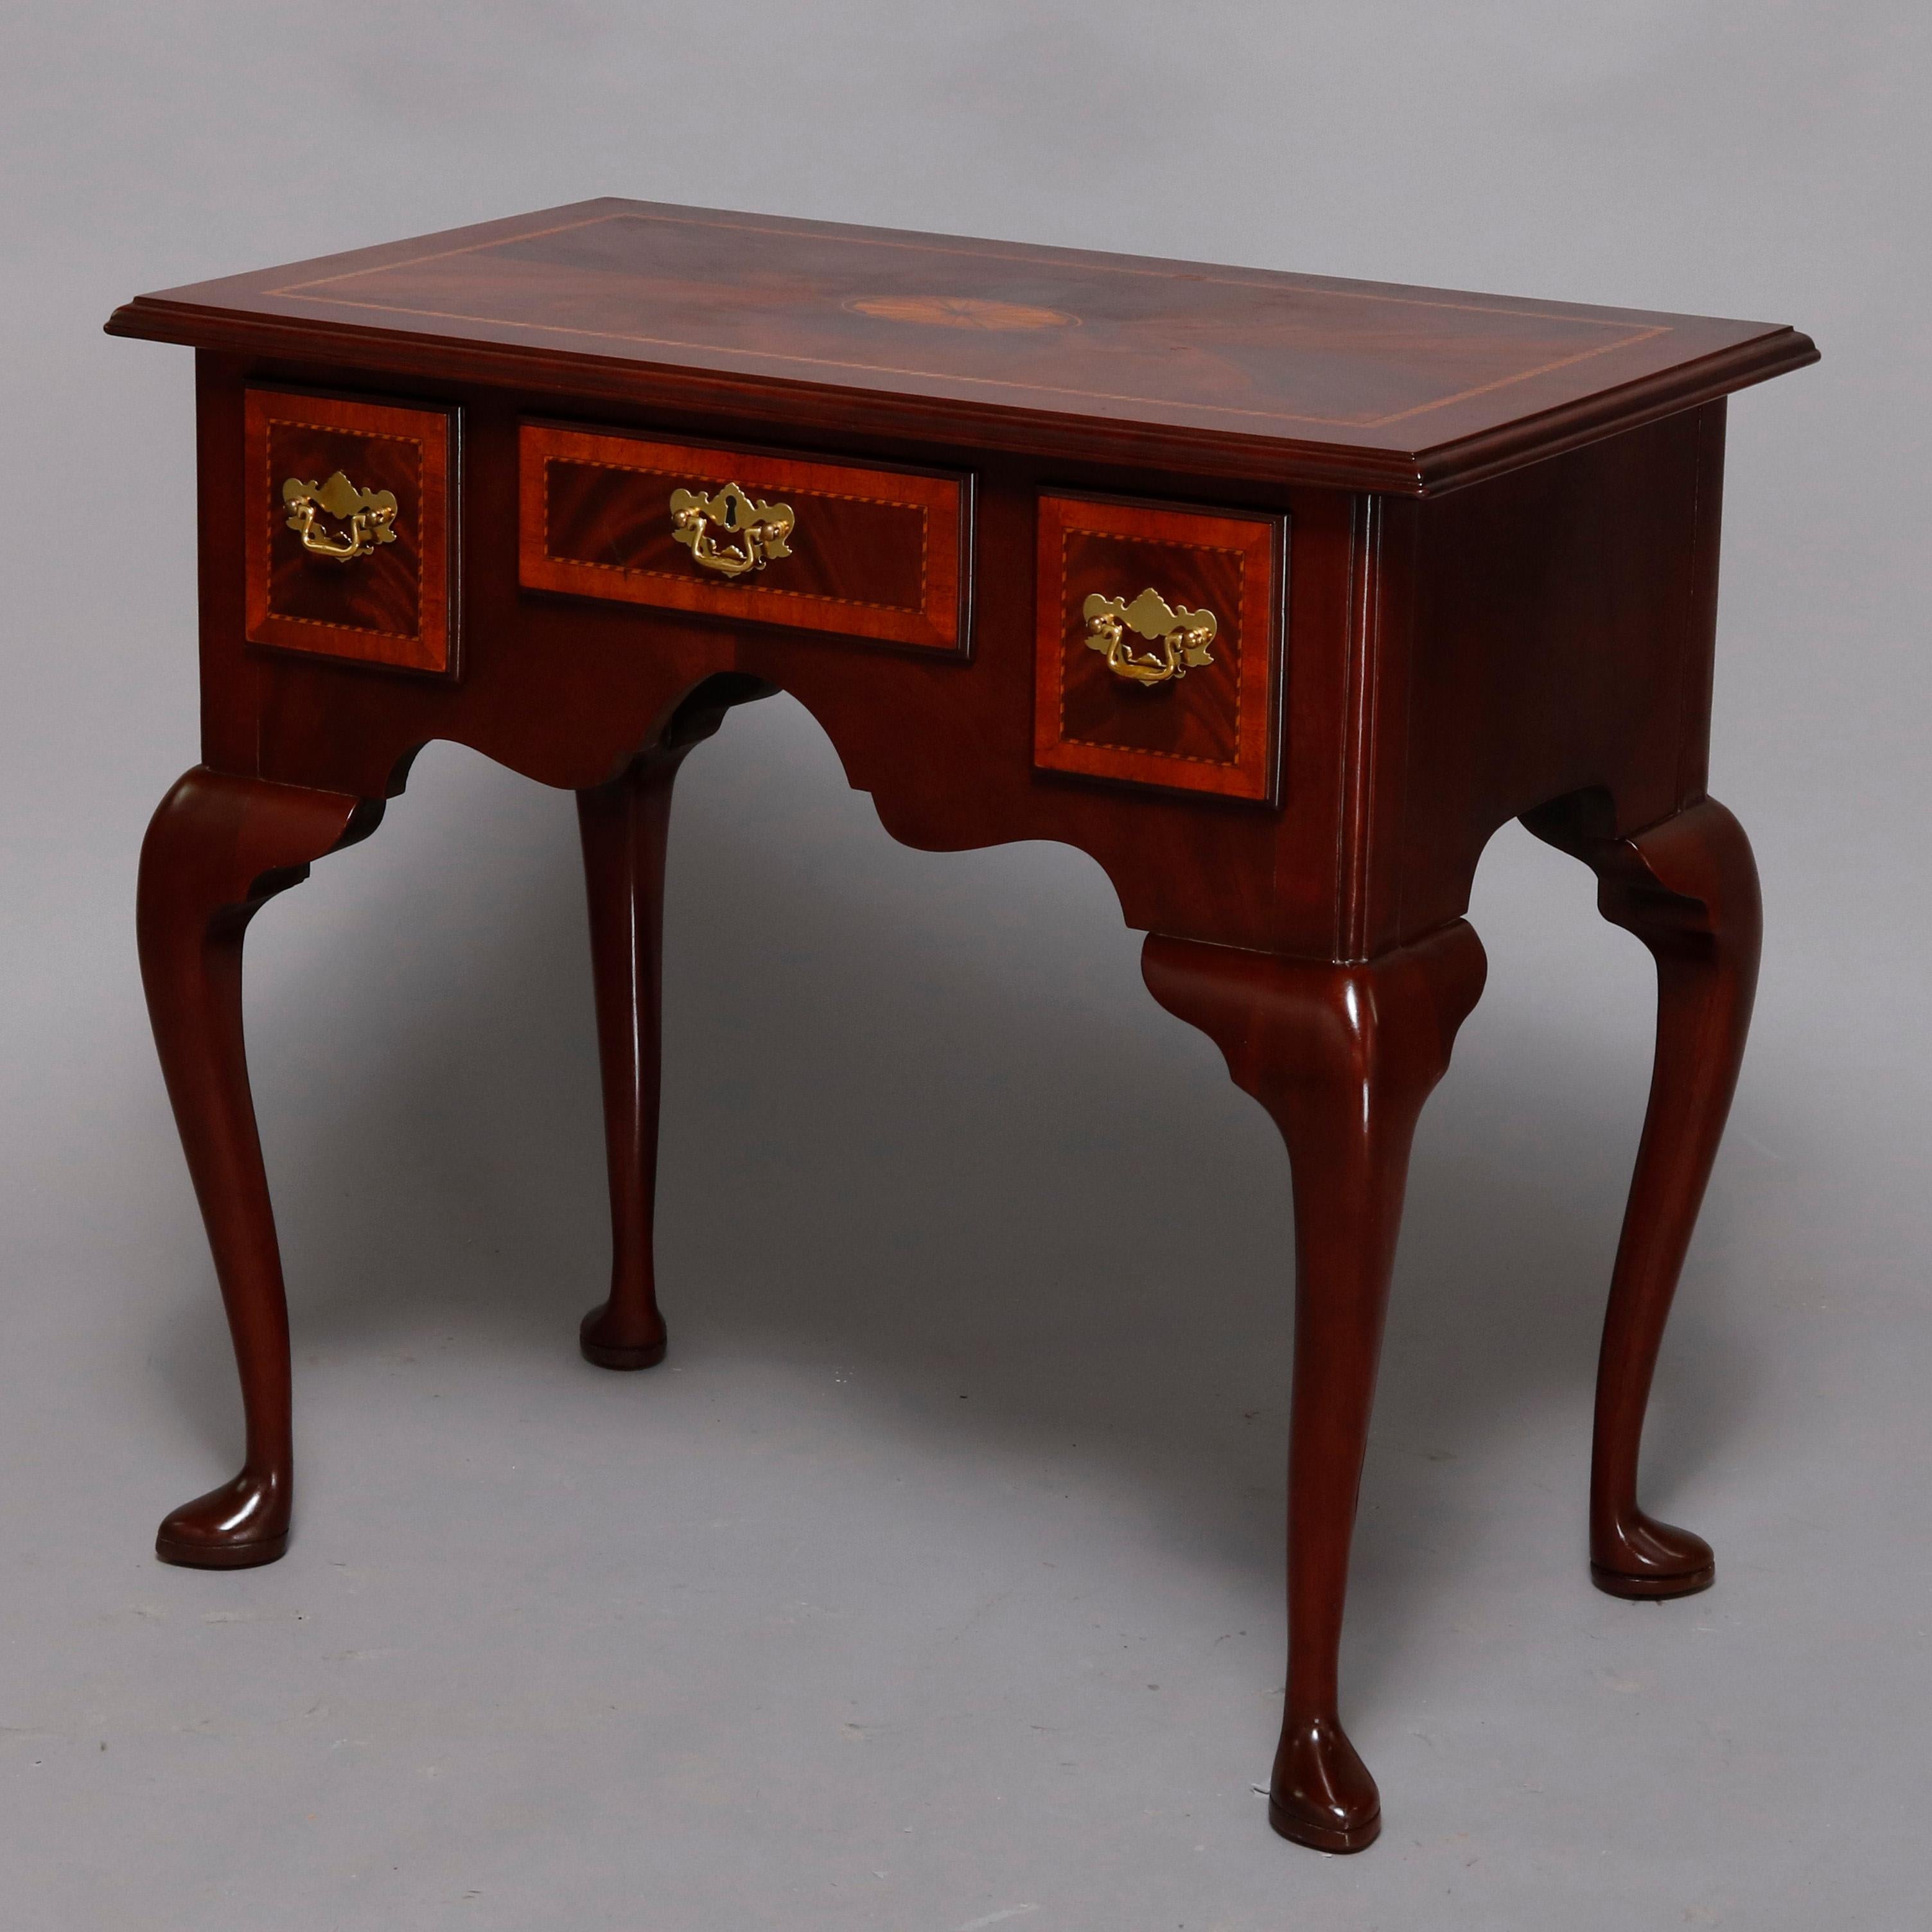 A Queen Anne style server custom handcrafted by Councill Craftsmen offers flame mahogany construction with cabinet having three cross banded drawers surmounted by satinwood inlaid top with central patera and rope twist banding, raised on cabriole